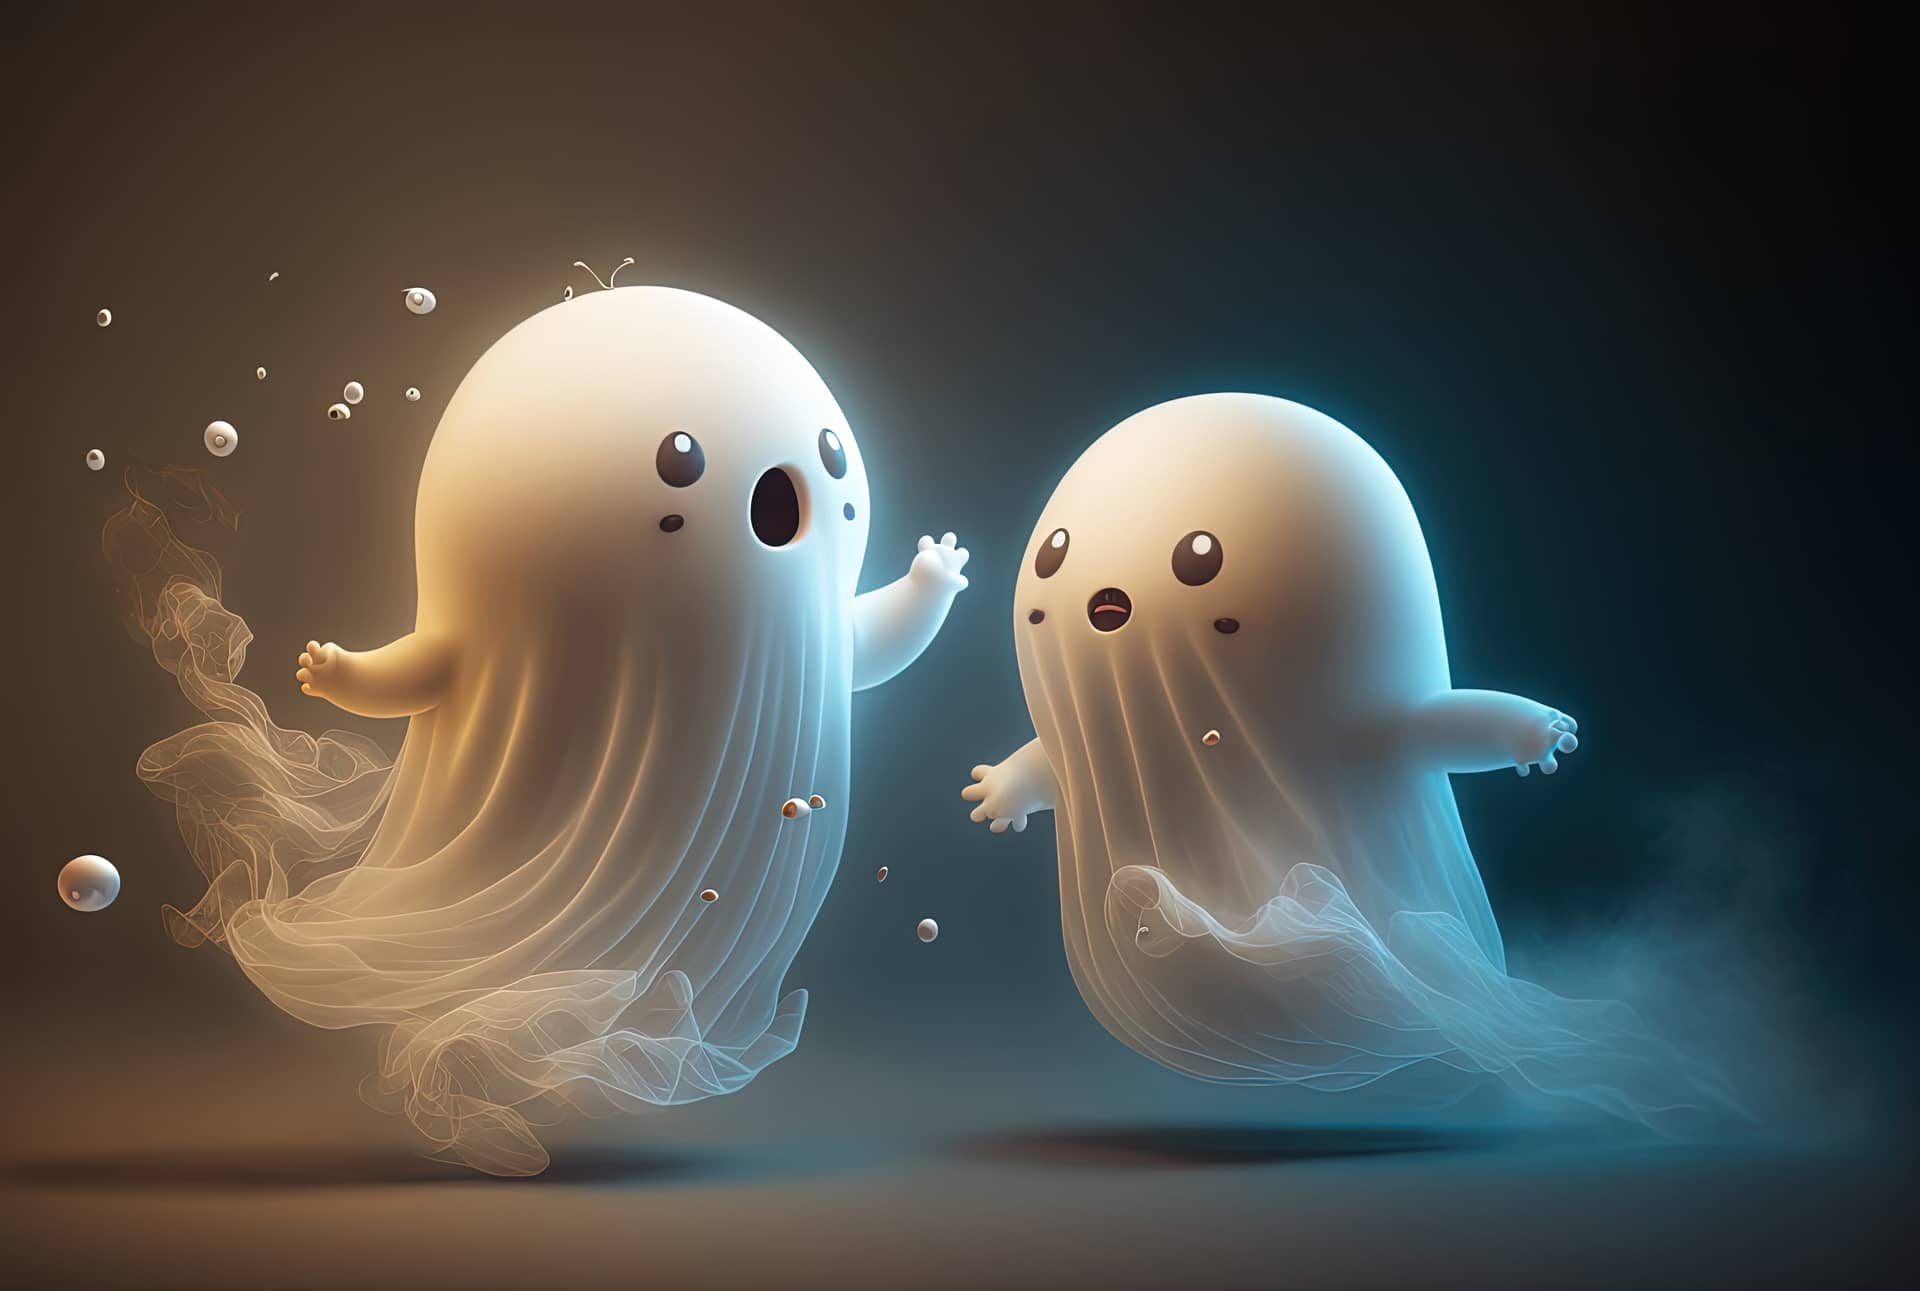 Cute so scary ghost playing having fun generative fine image